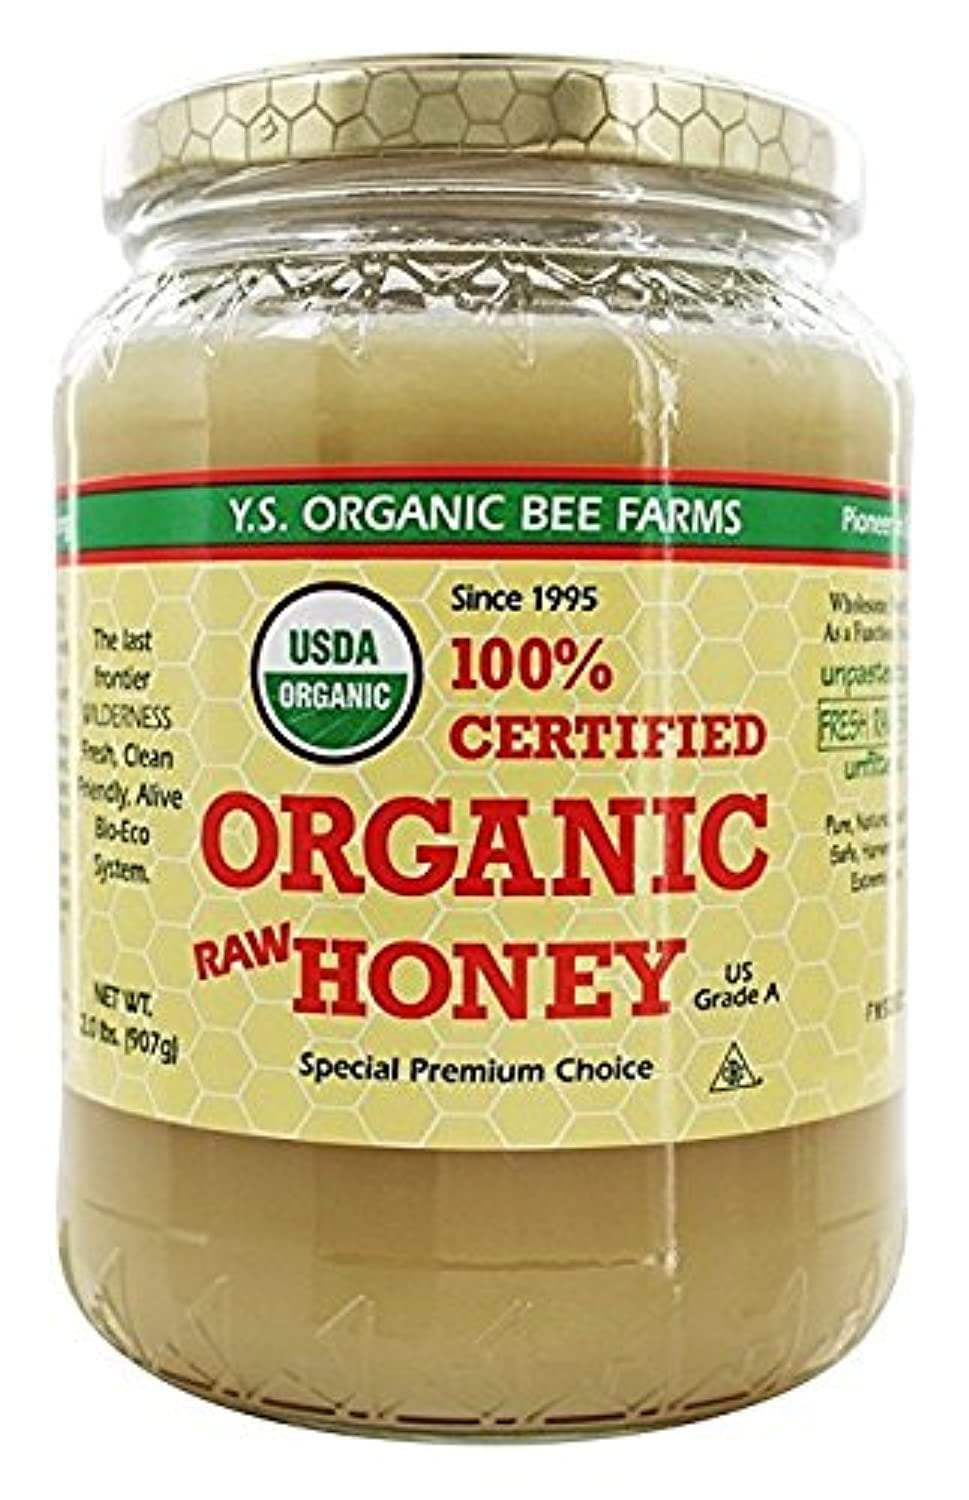  Ys Eco Bee Organic Honey 2 Pounds : Grocery & Gourmet Food